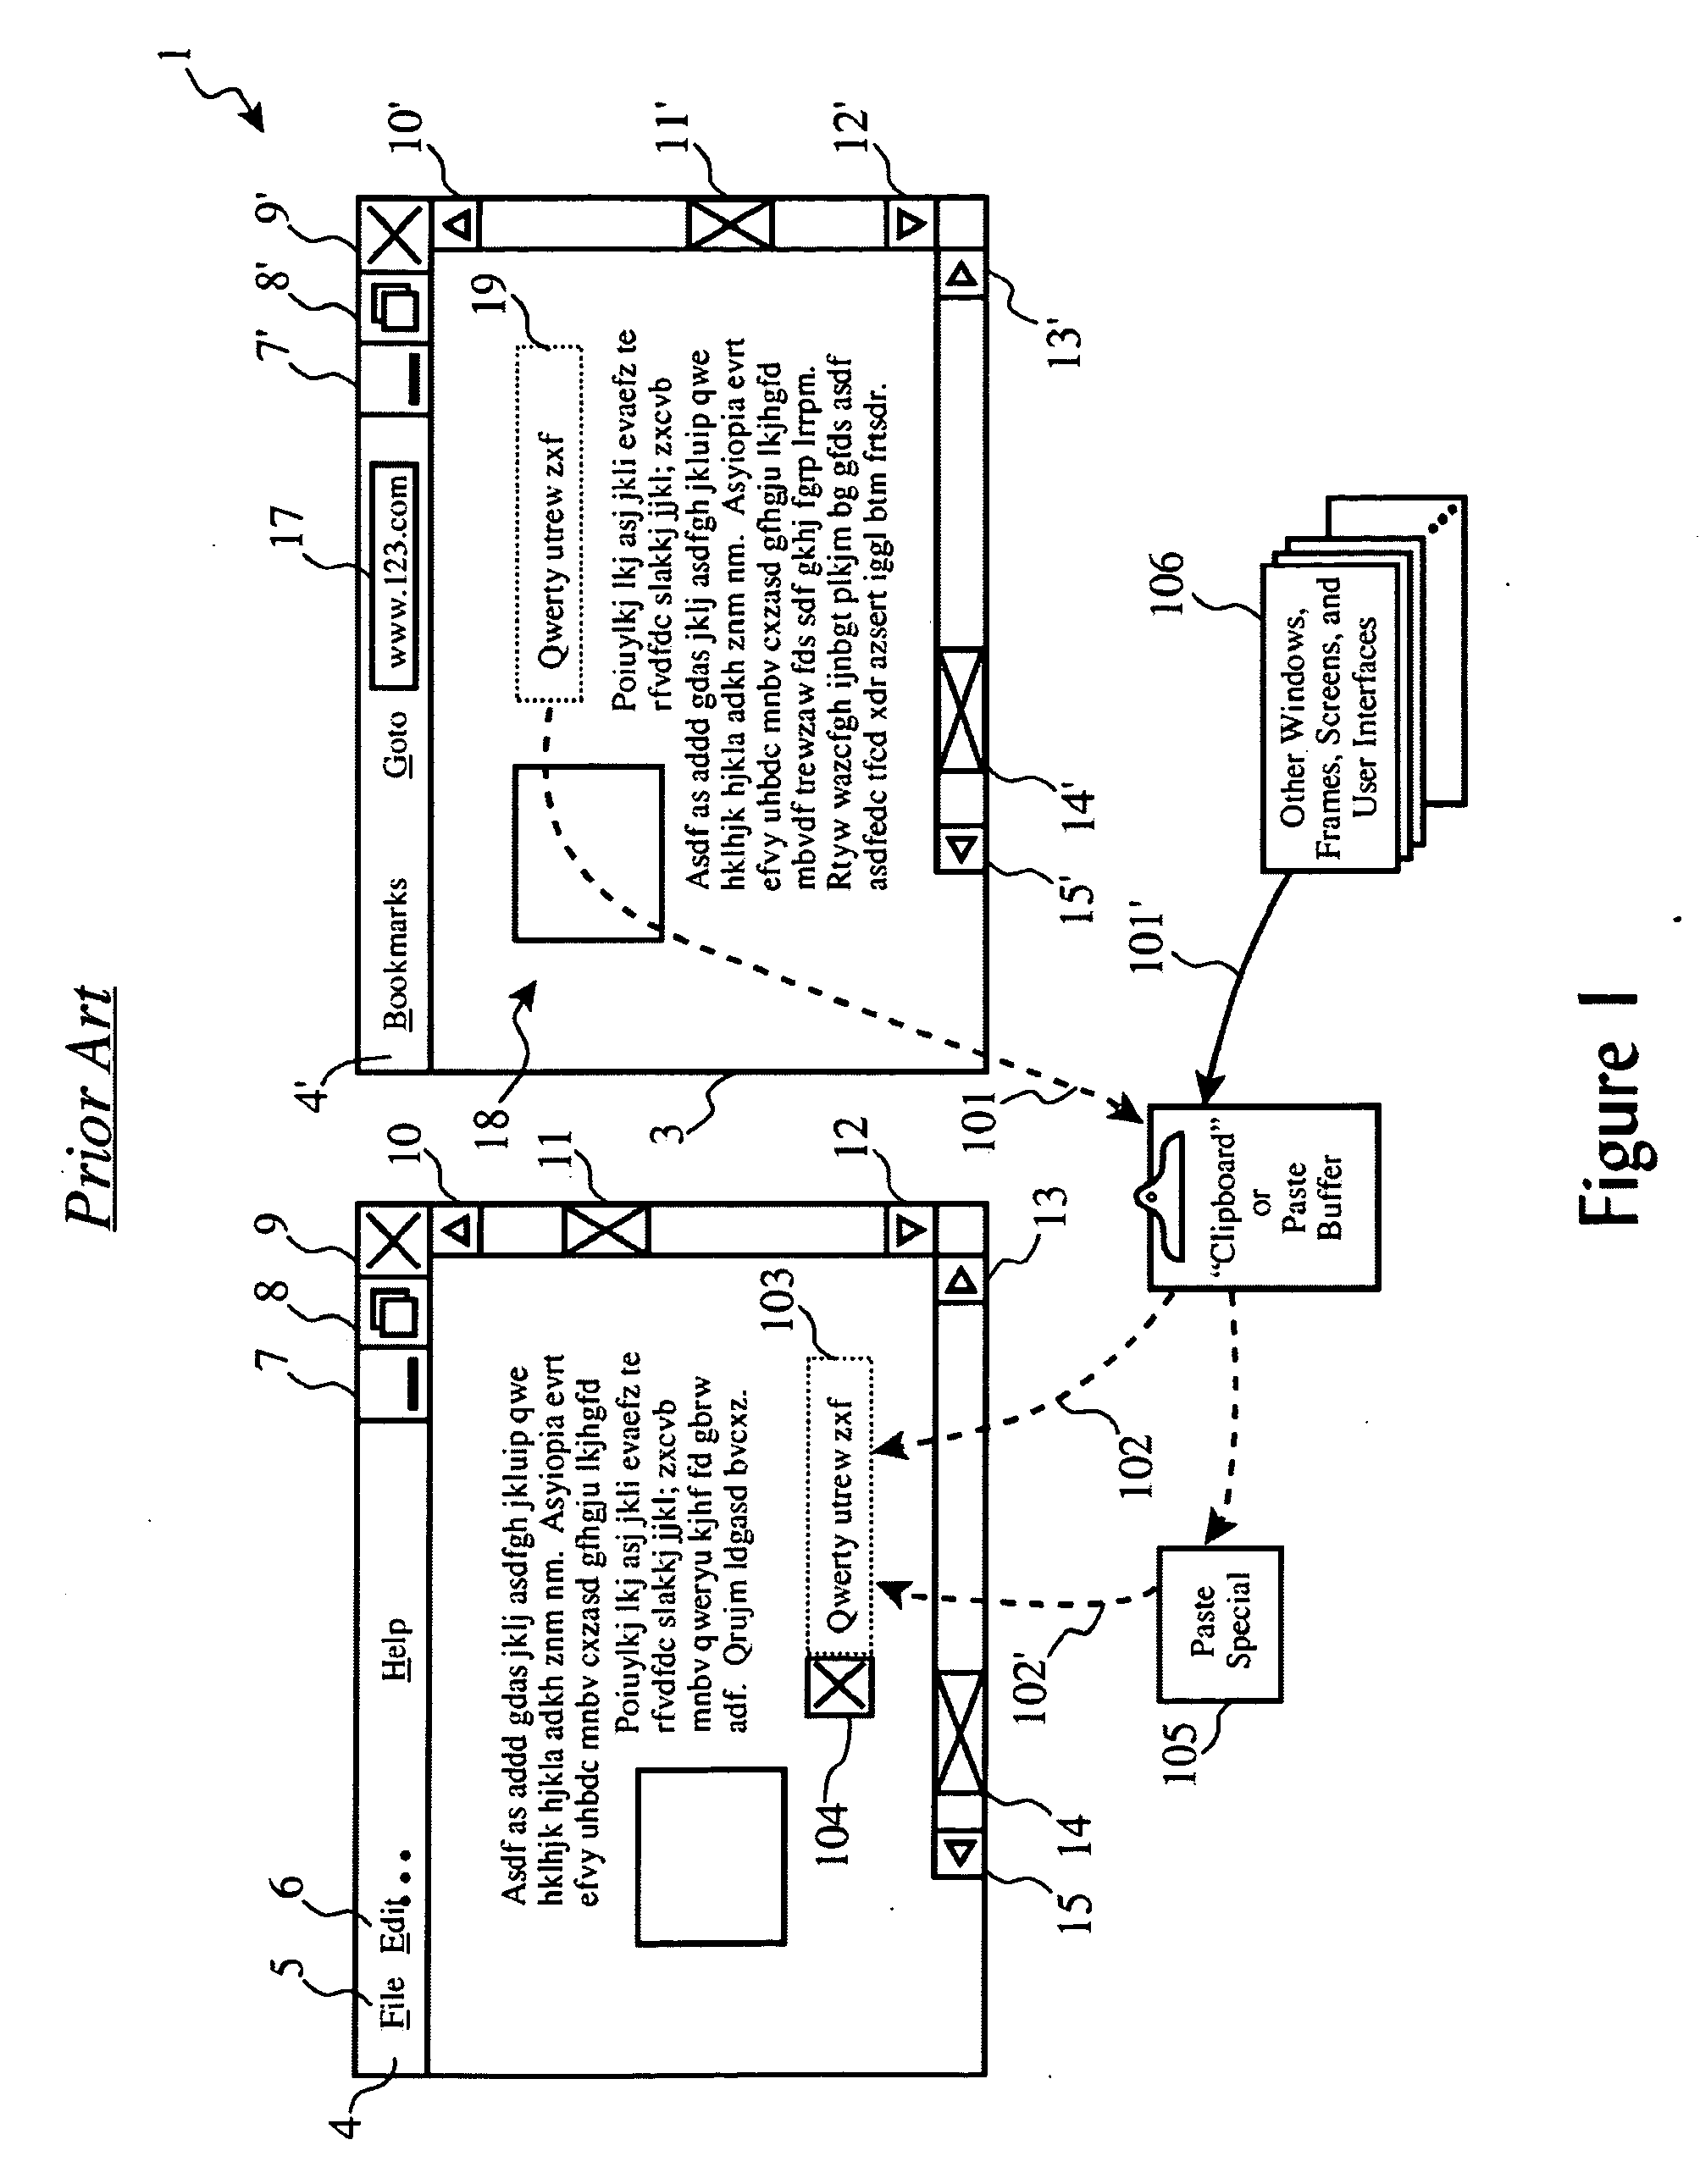 System and Method for Automatic Natural Language Translation of Embedded Text Regions in Images During Information Transfer